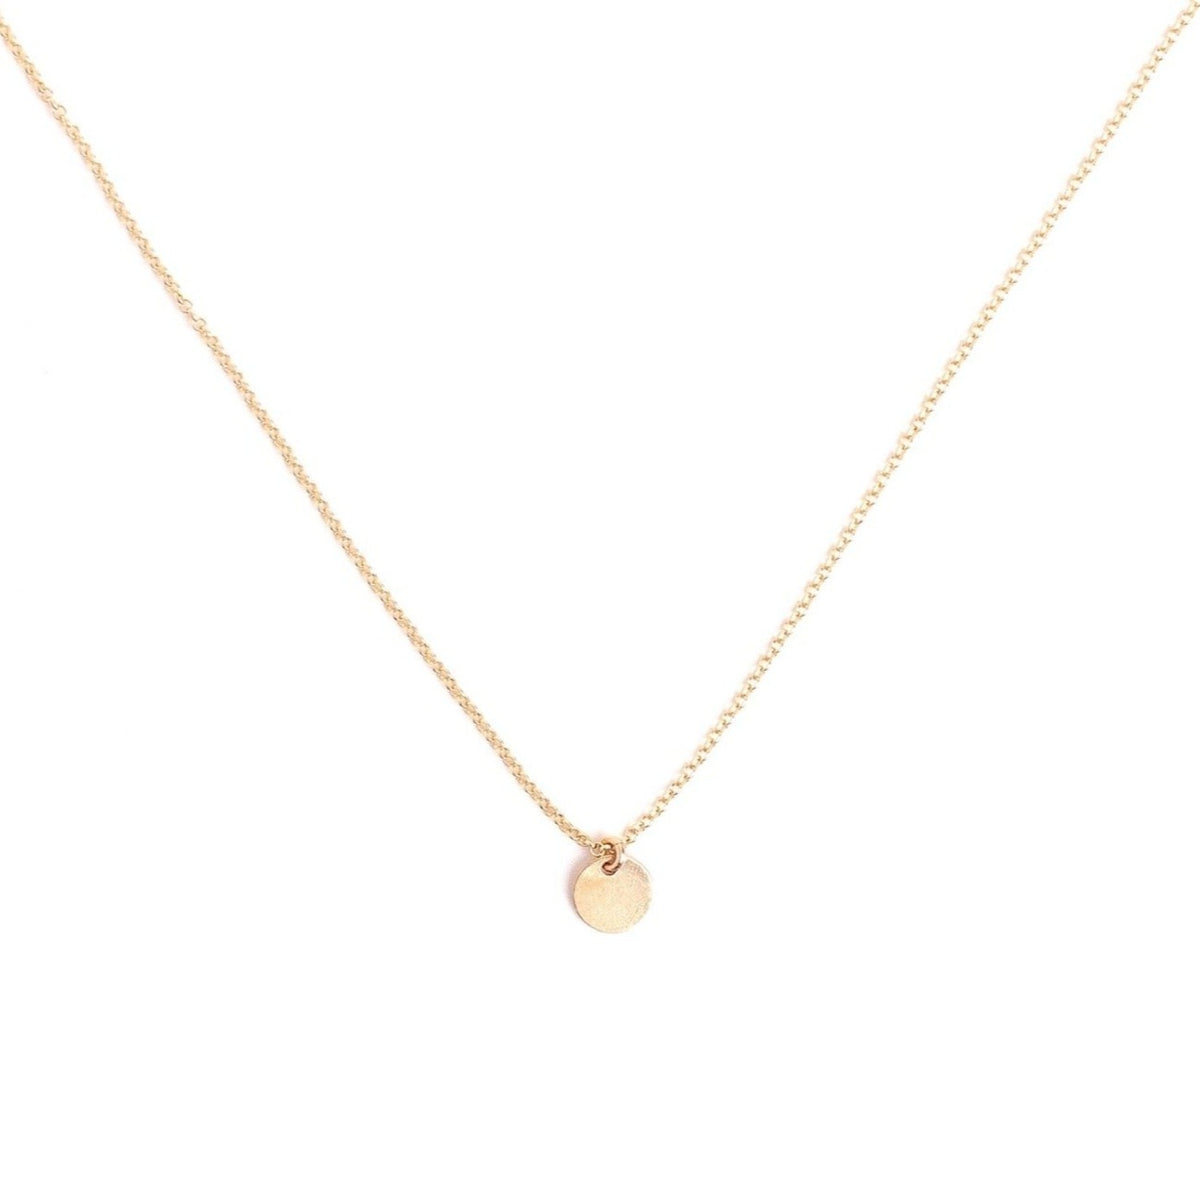 Reflection Necklace - Handmade 14-karat Gold-Filled Necklace | Go Rings